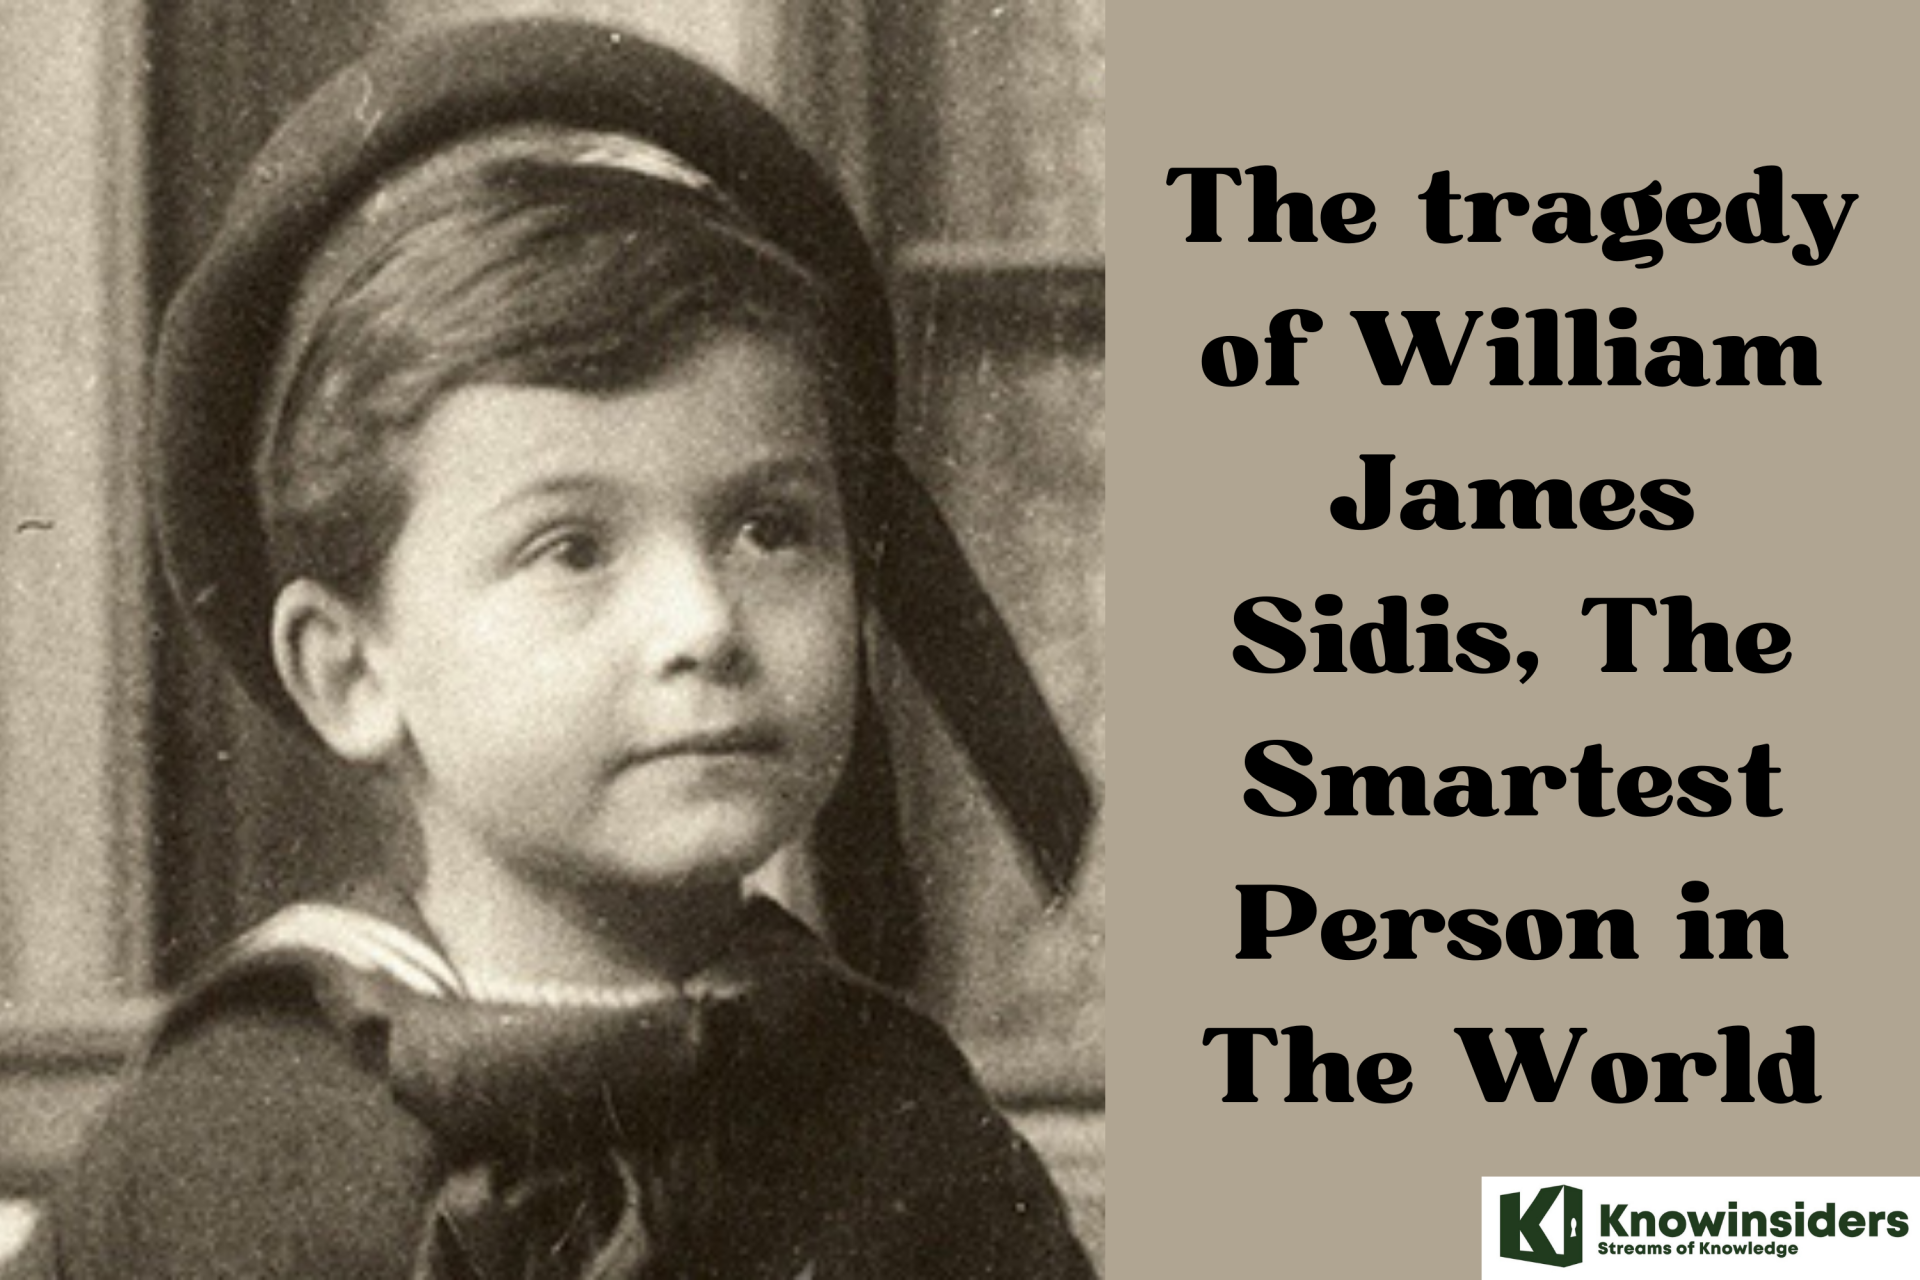 Tragedy of William James Sidis - Smartest Person Ever Lived in the